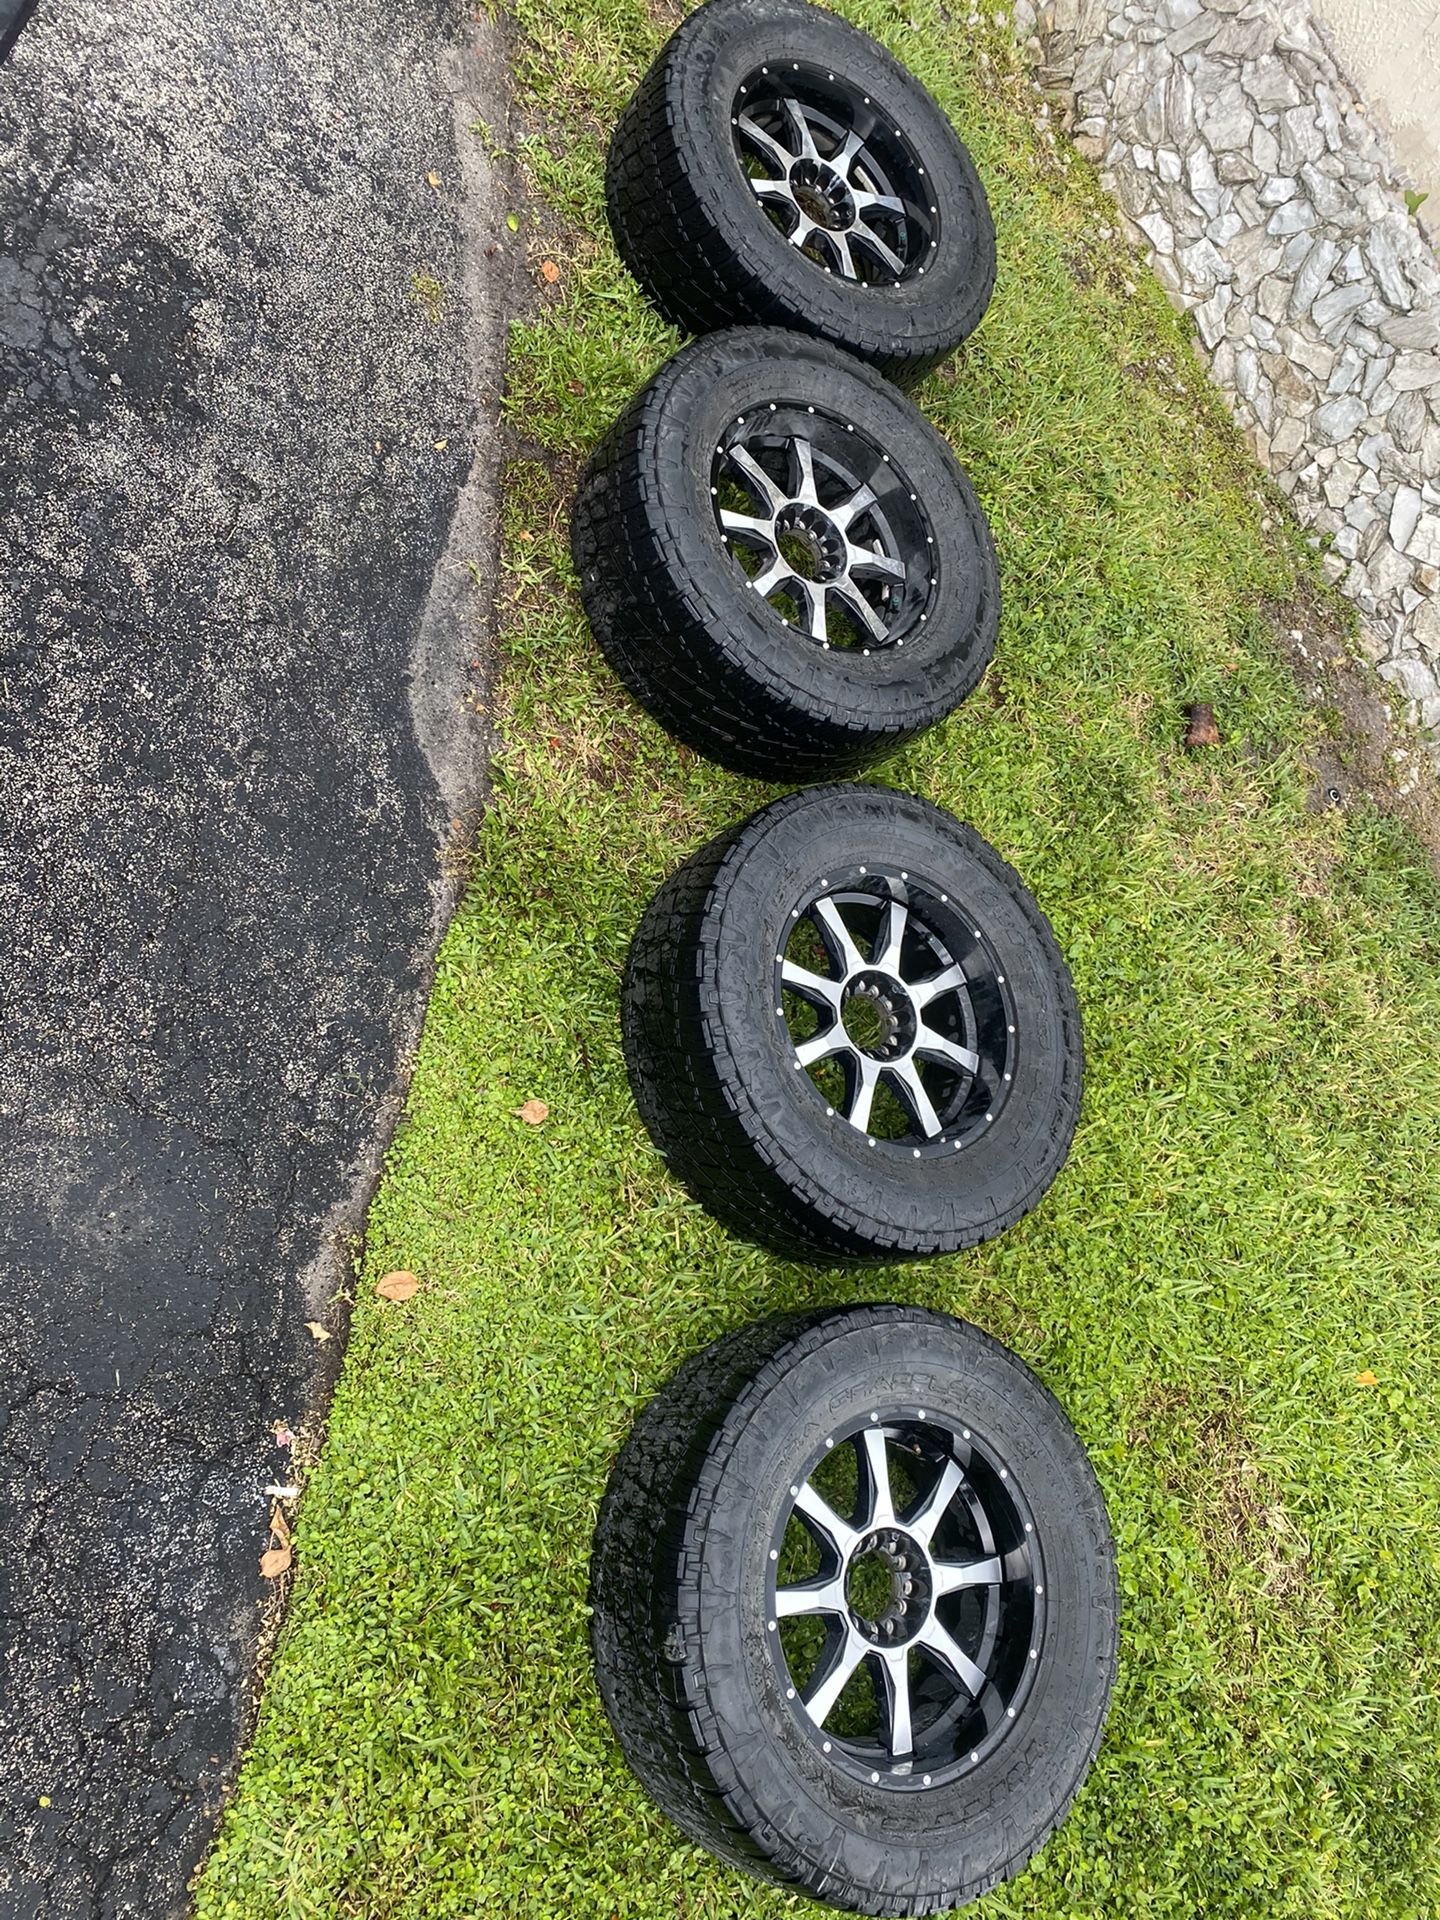 Truck rims with tires